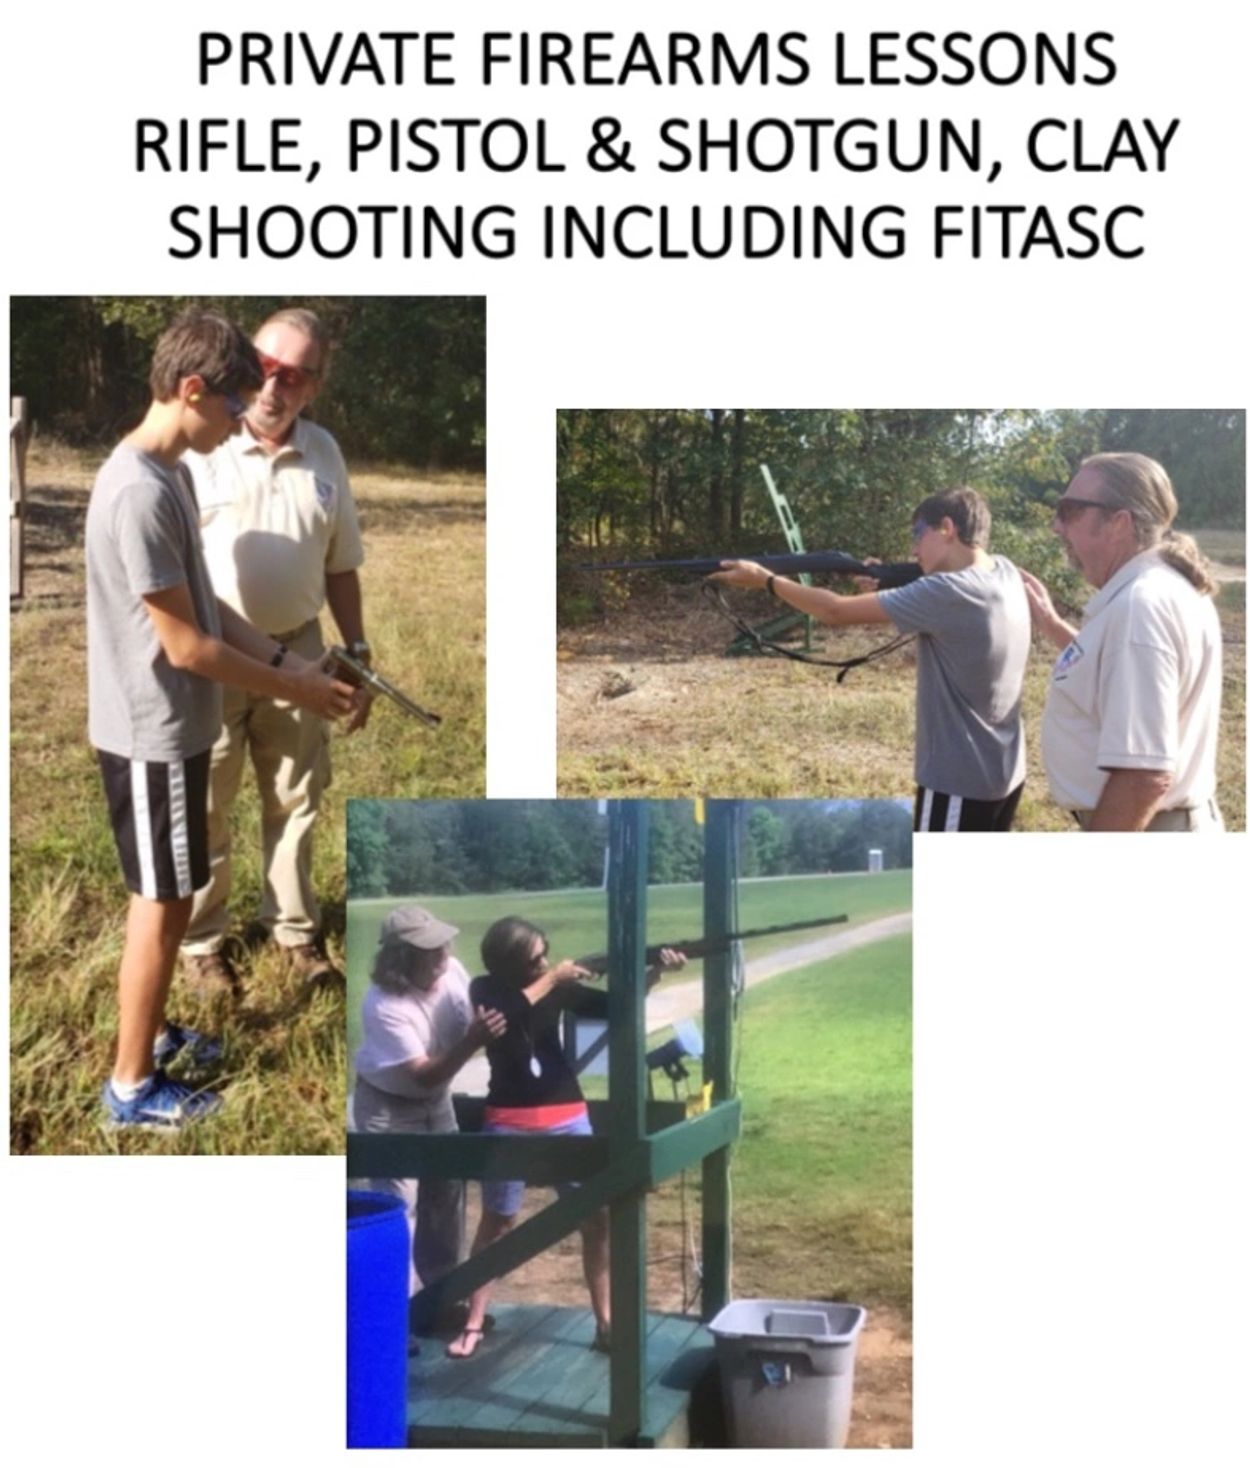 ALSO ASK ABOUT OUR TEGA CAY FIREARMS CLUB. 